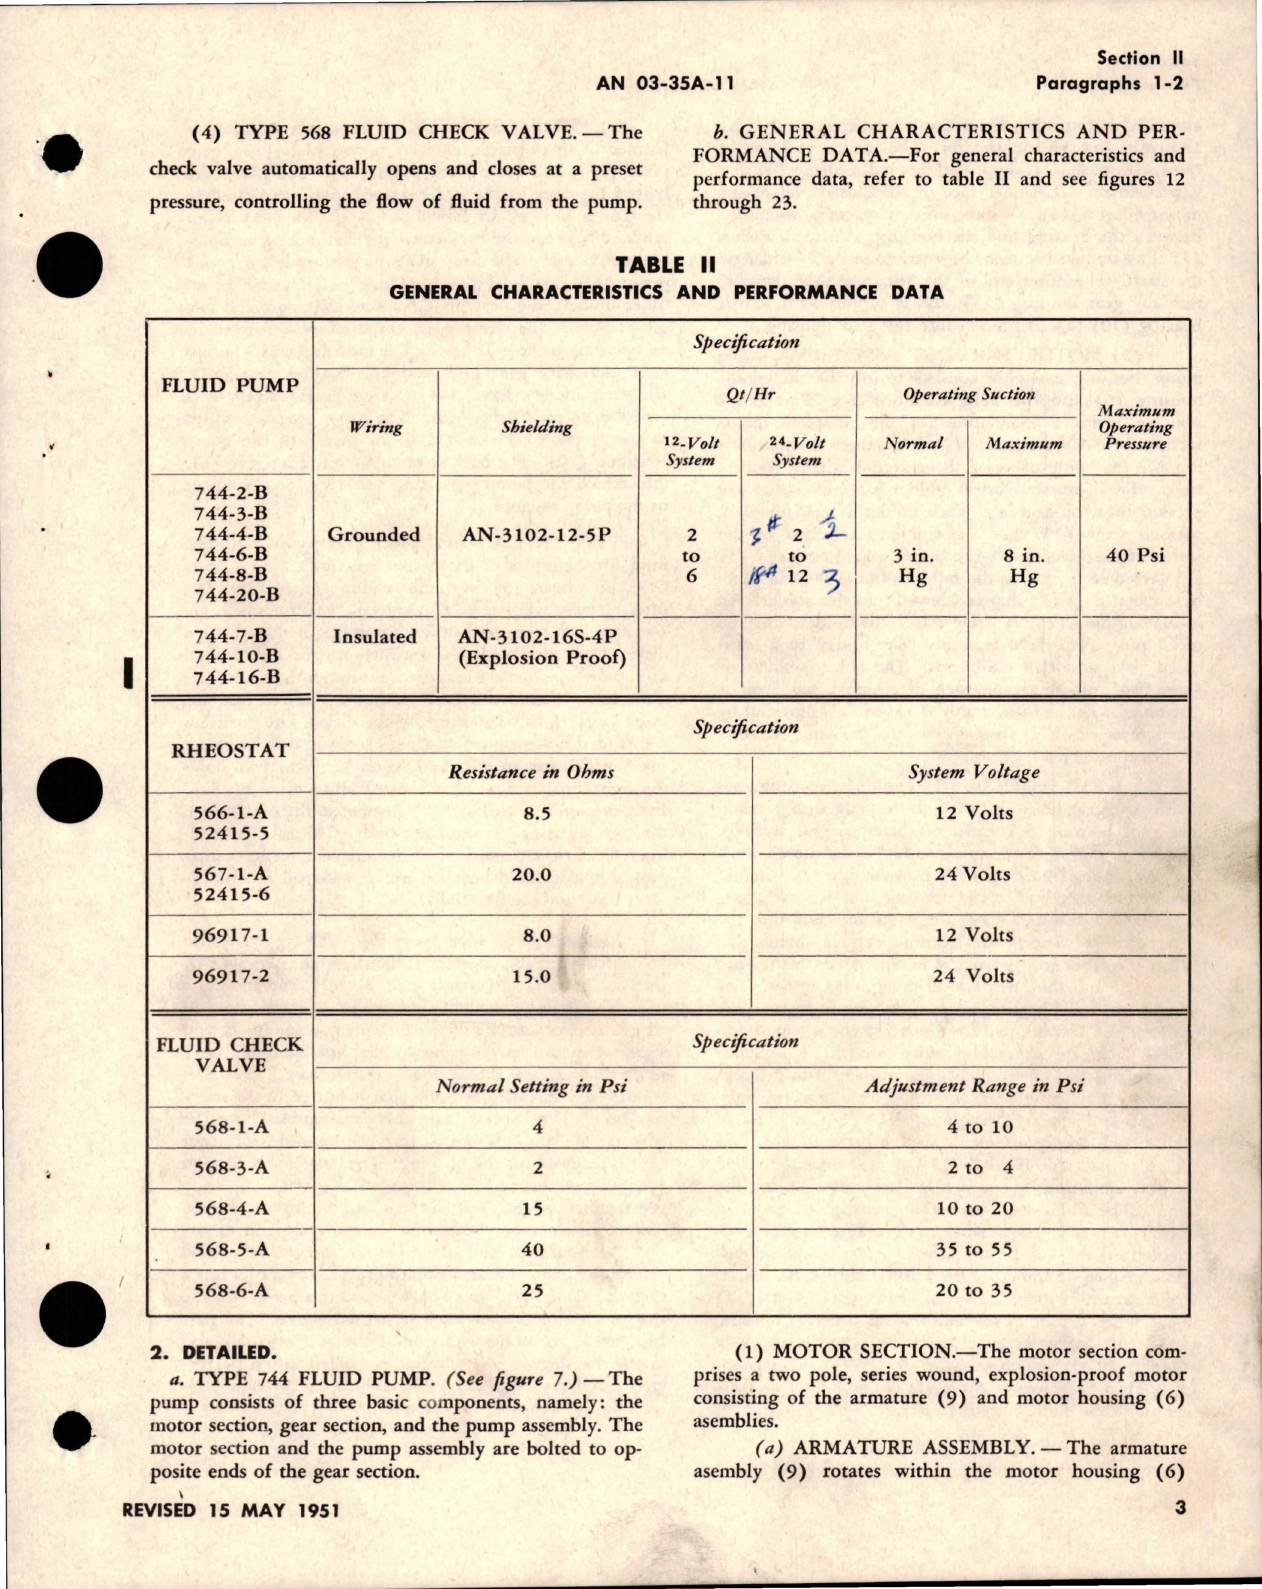 Sample page 9 from AirCorps Library document: Operation, Service and Overhaul Instructions with Parts Catalog for Propeller and Windshield Anti-Icer Pumps - Type 744